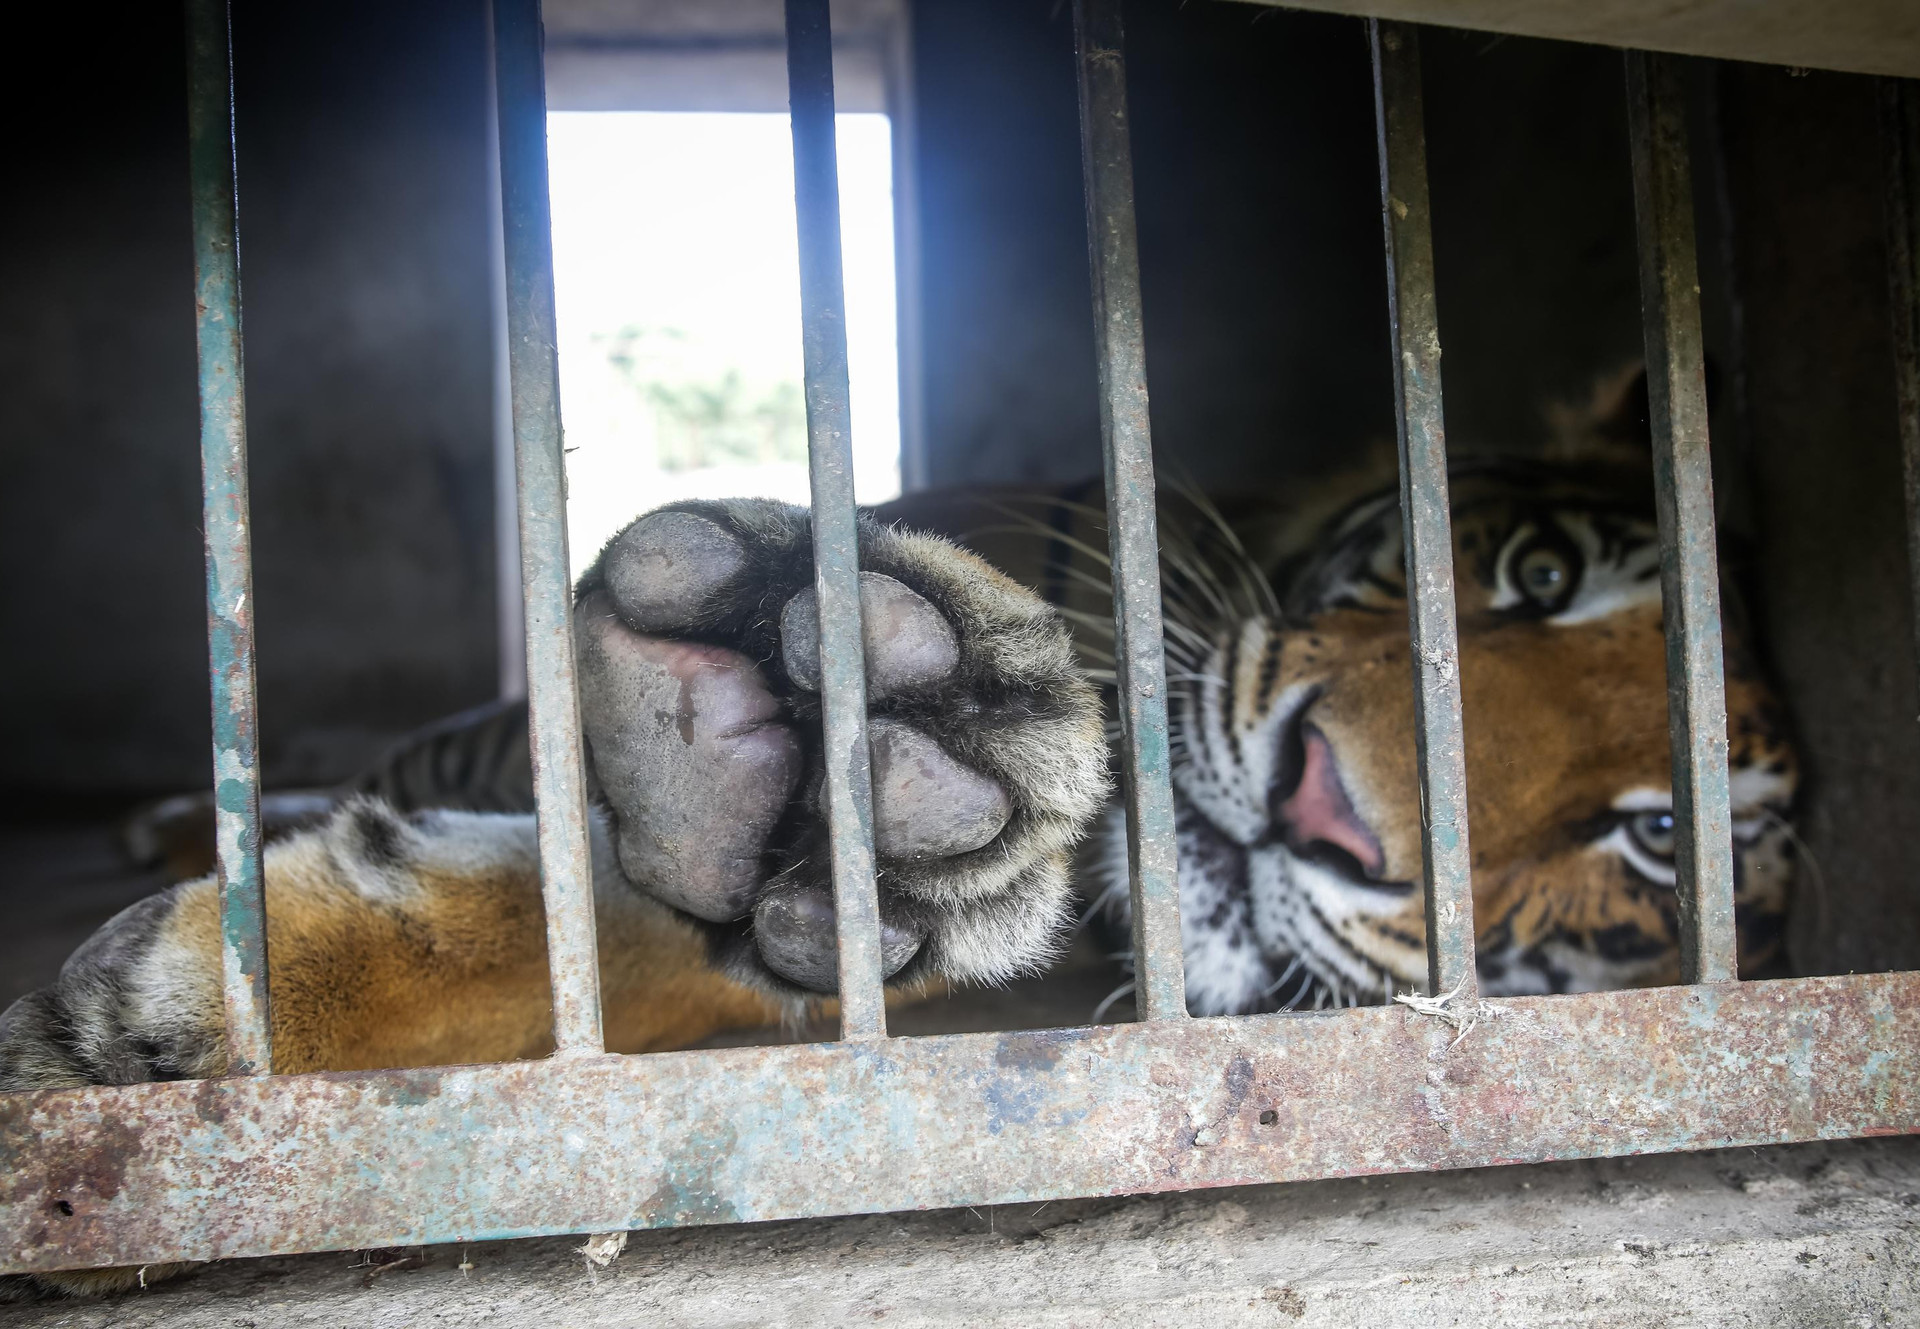 Big Cat Trade: The Thin Line Between Legal and Illegal Trade - FOUR PAWS in  US - Global Animal Protection Organization